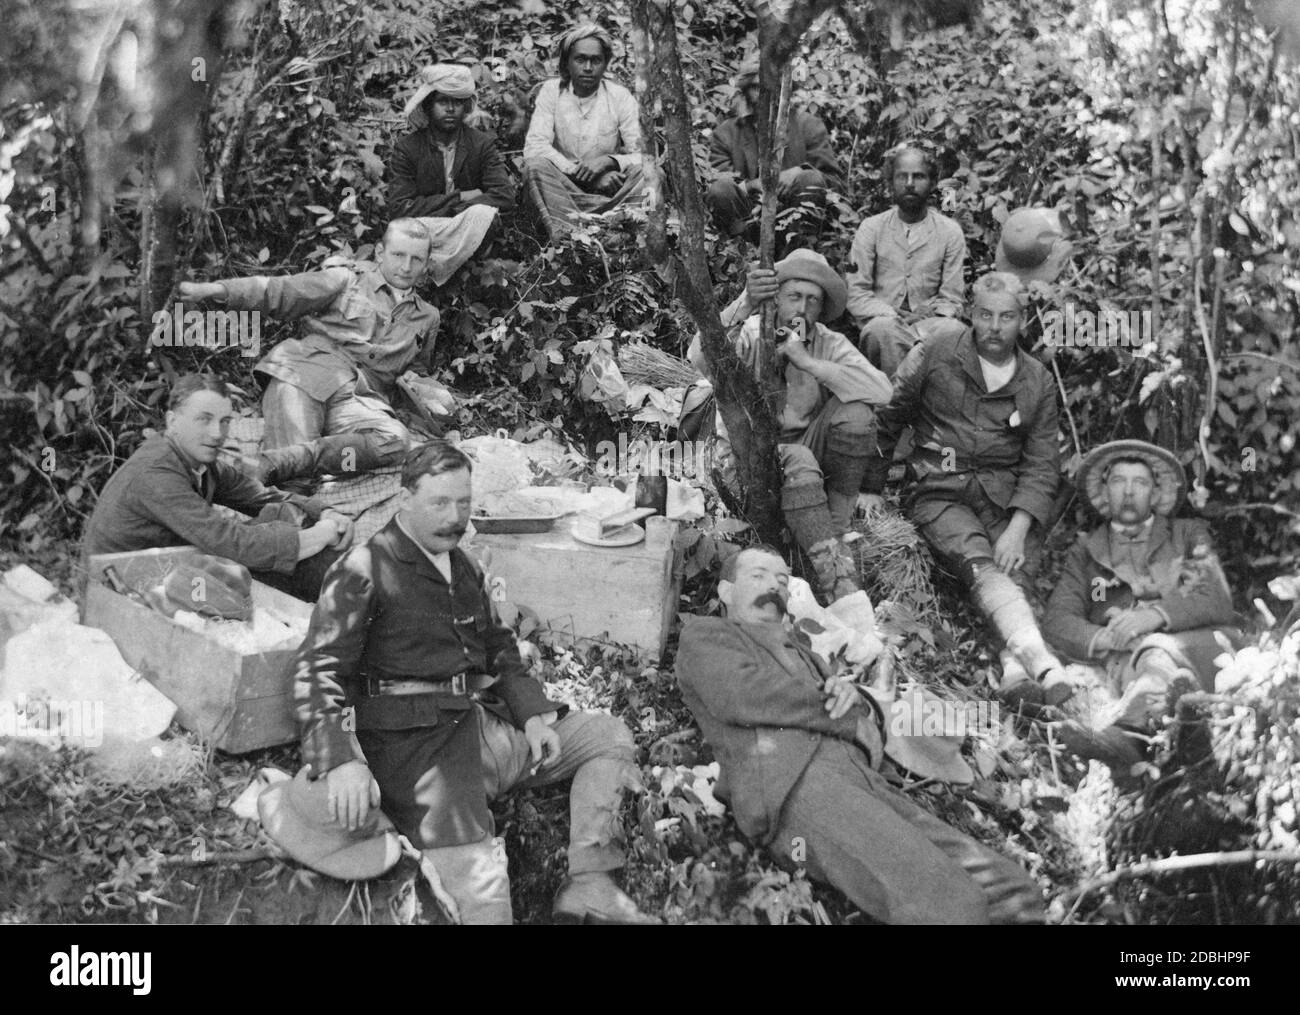 Prince Henry of Prussia (centre, holding on to a tree and smoking a pipe) is on a hunting trip in Nuwara Eliya in Sri Lanka. The hunting party is taking a break with food and drink. The picture was probably taken in the 1890s. Stock Photo